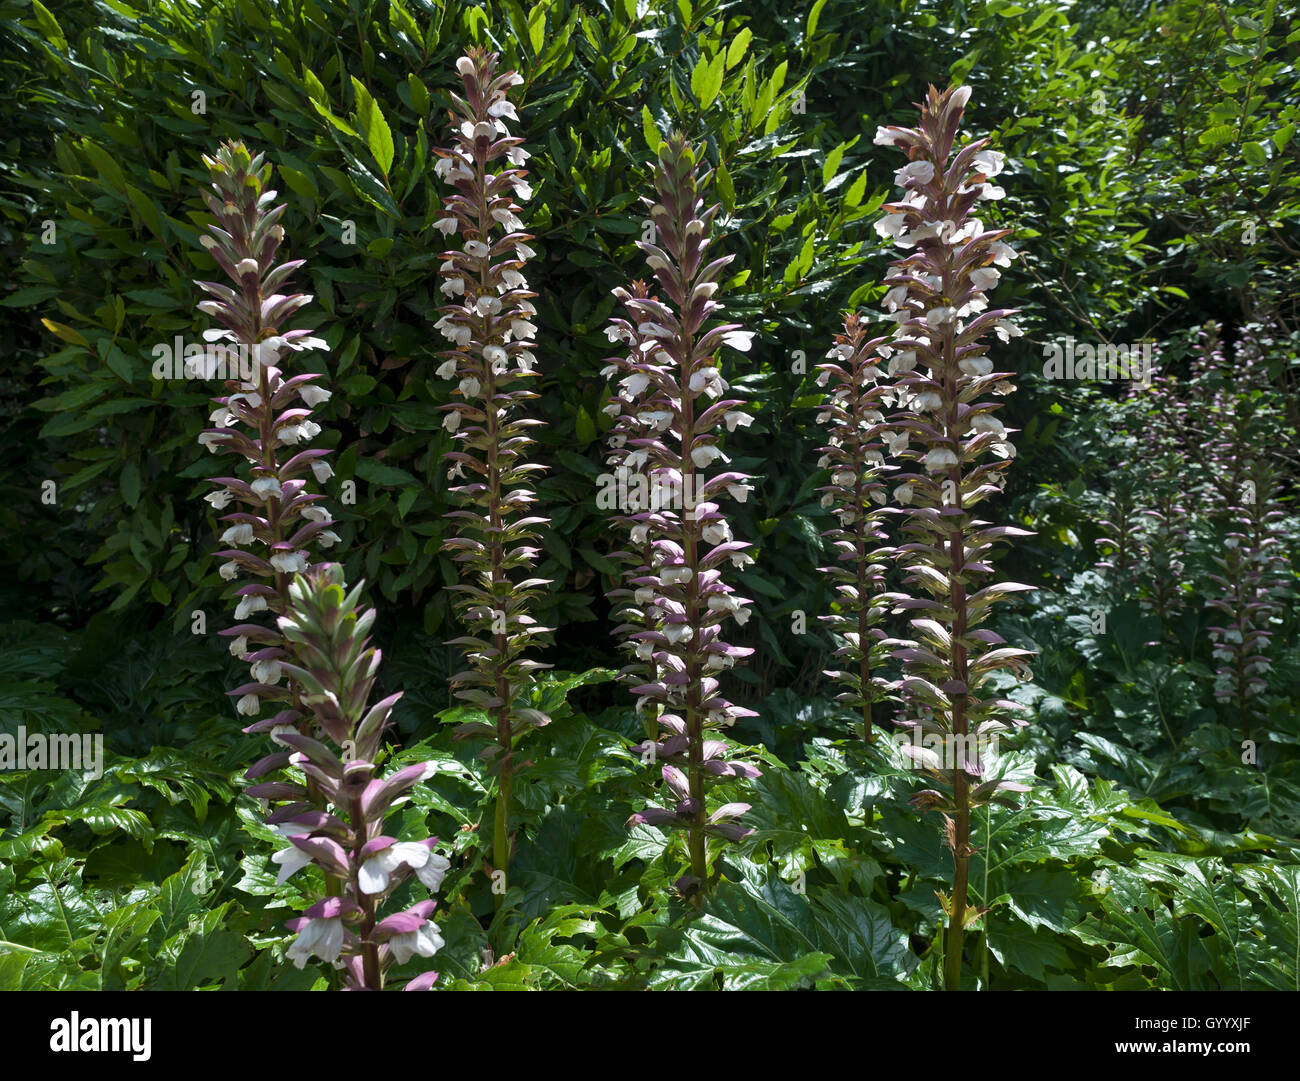 Page 2 - Acanthus High Resolution Stock Photography and Images - Alamy